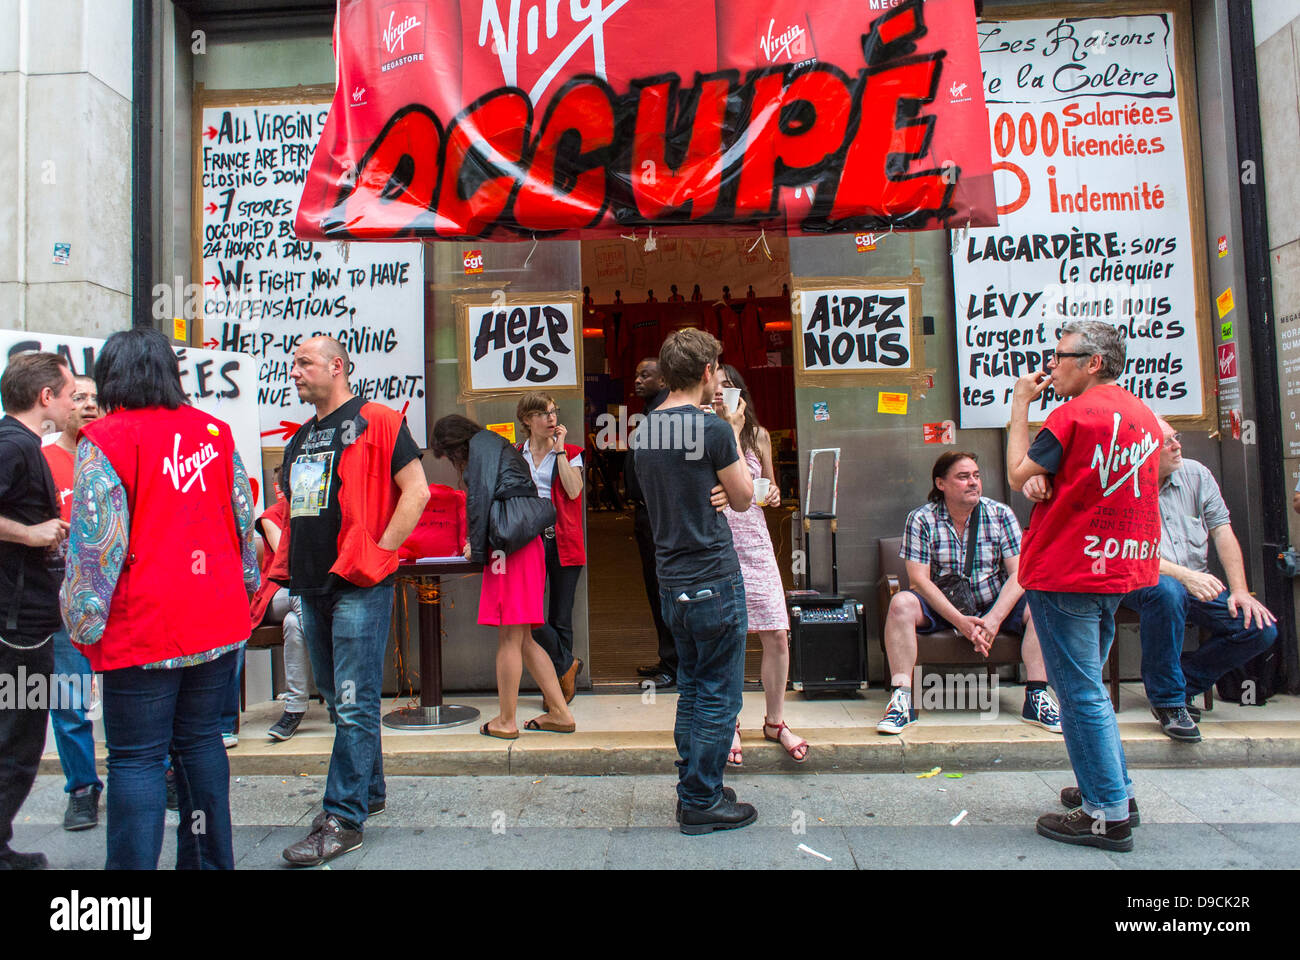 Paris, France. Medium Crowd People, Demonstration in Front of Virgin Megastore, French Workers, Emplyees, Occupying Closed store, labour workers, personnel cuts Stock Photo